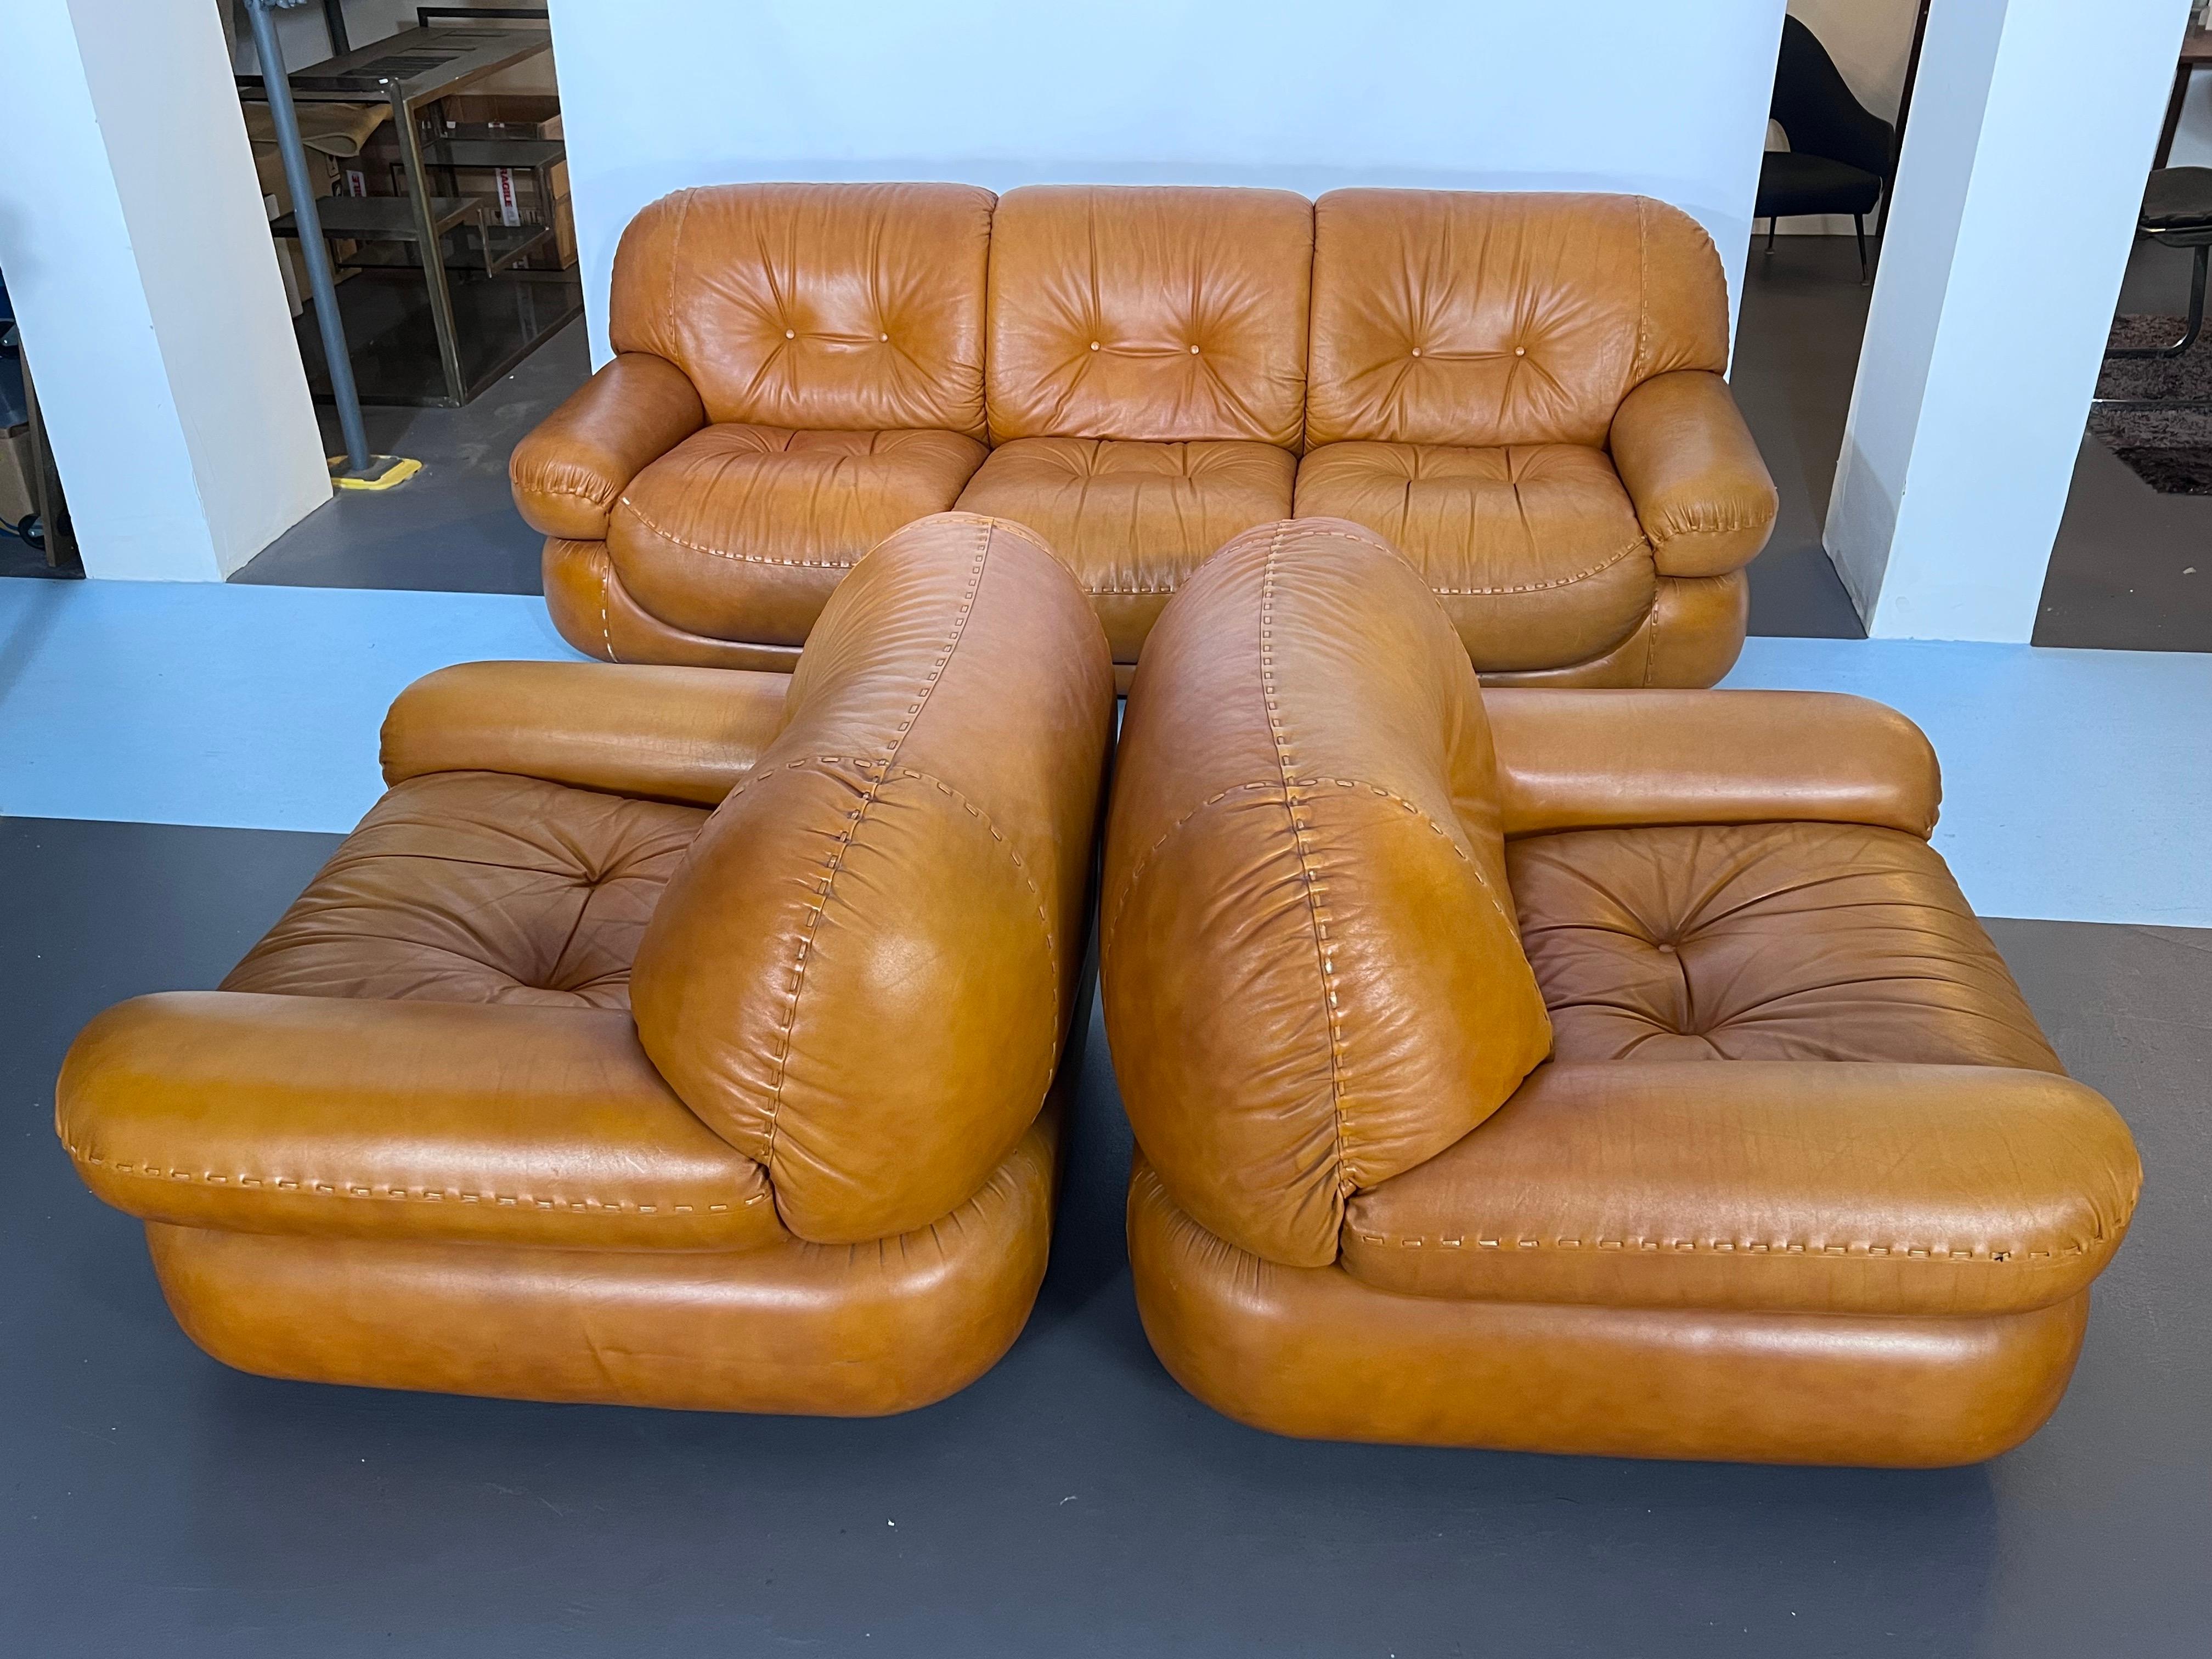 Vintage Sofa Set in Cognac Leather by Sapporo for Mobil Girgi, Italy, 1970s For Sale 4